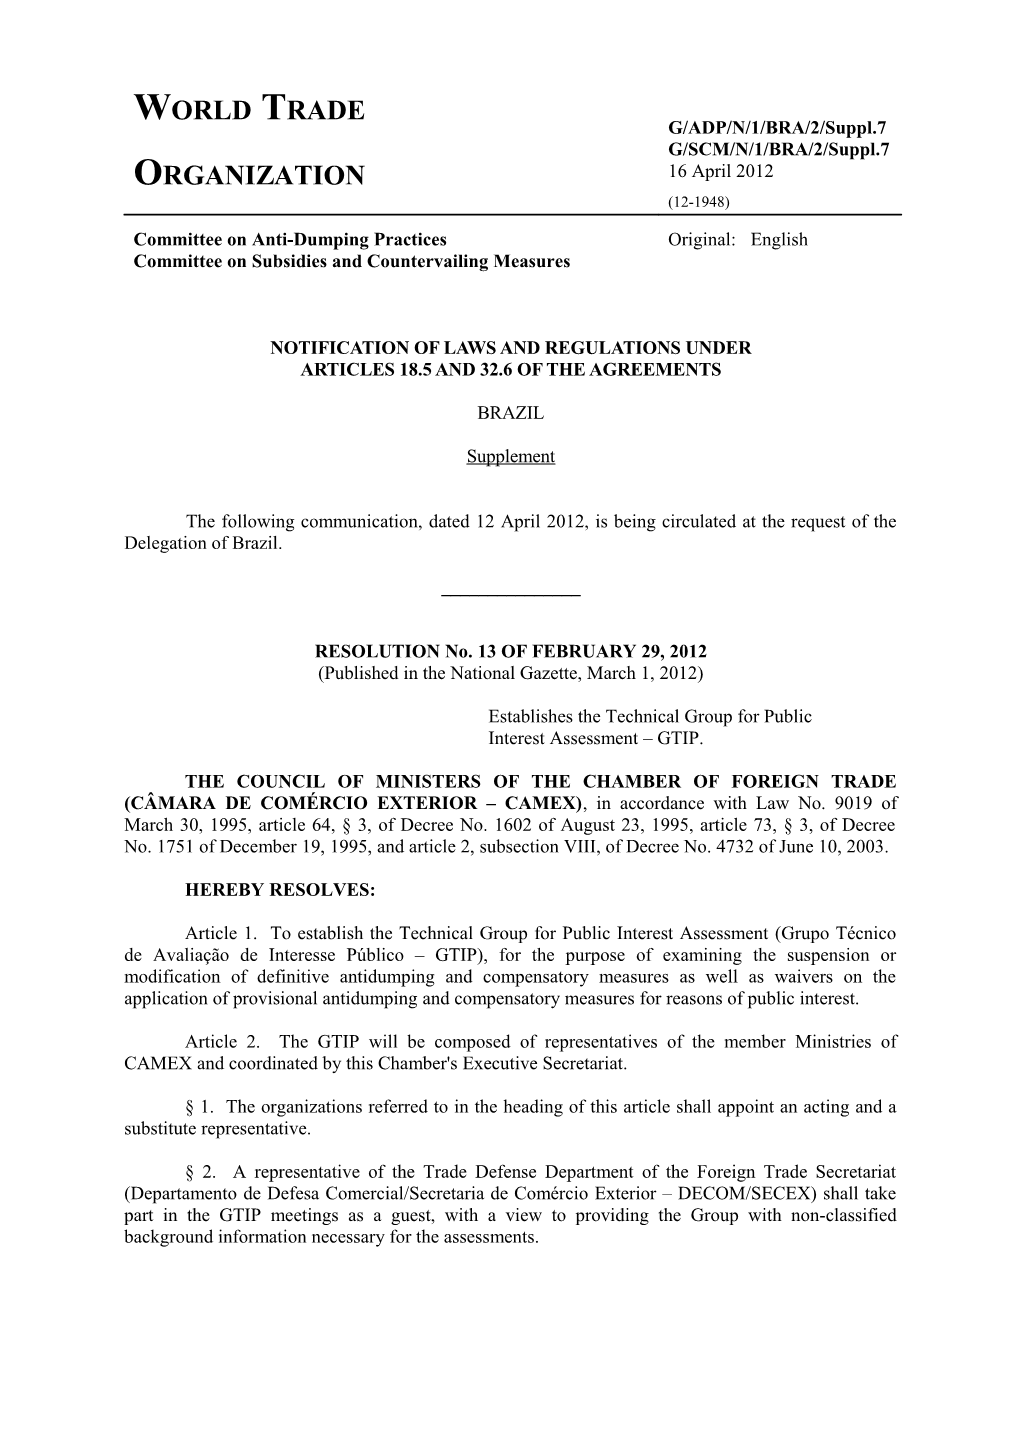 NOTIFICATION of LAWSAND REGULATIONS Under